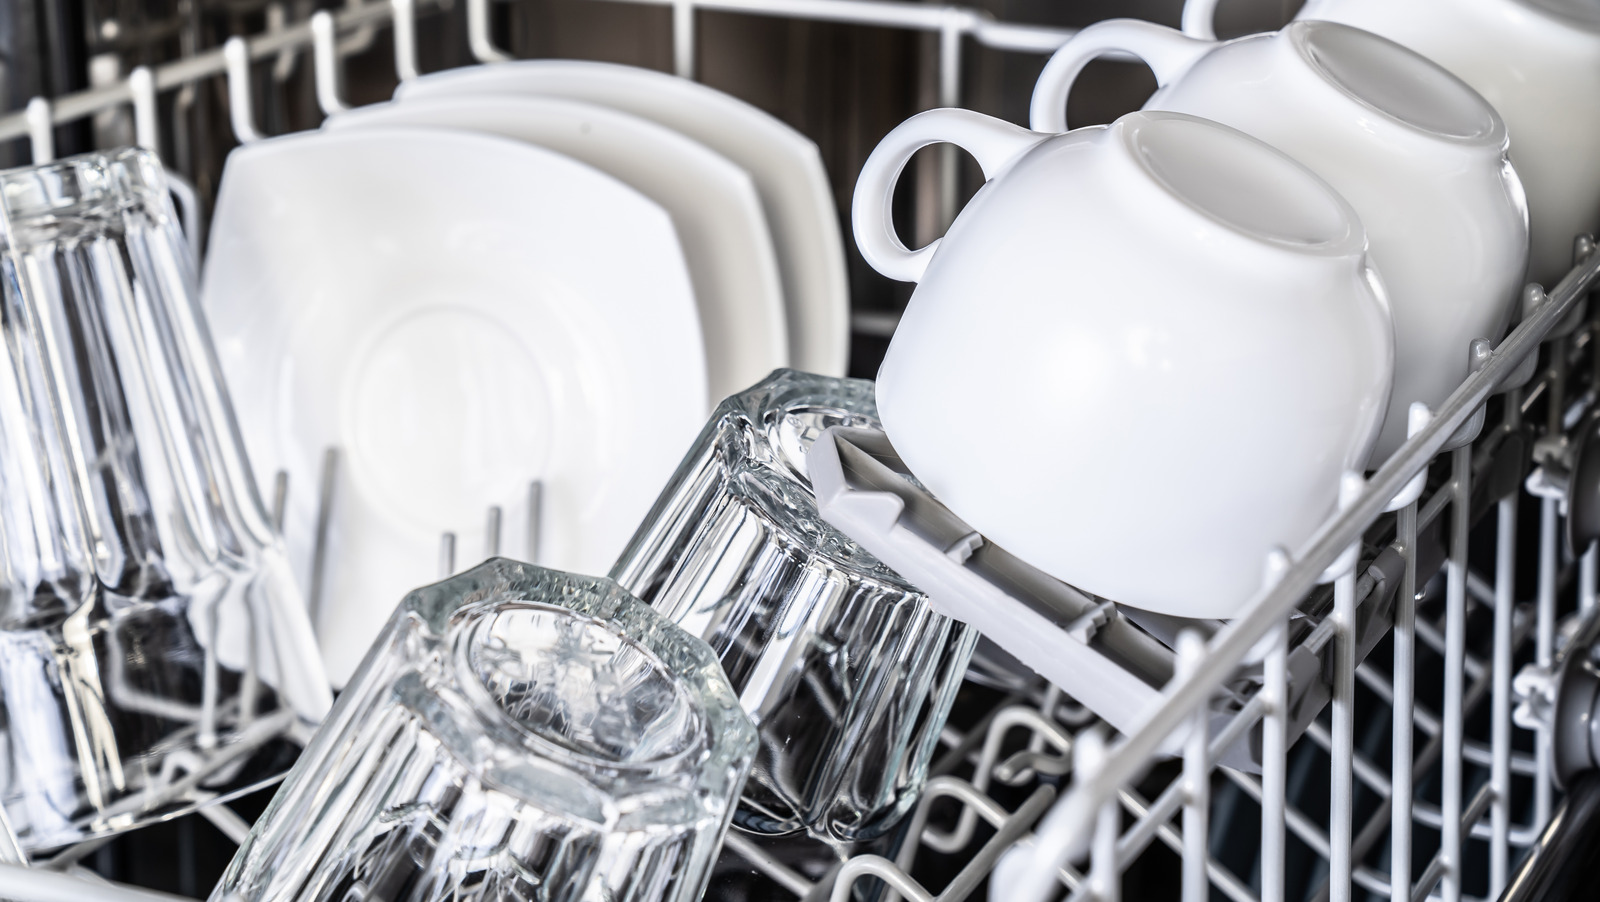 Add stainless steel to the kitchen with Sabatier's Dish Rack